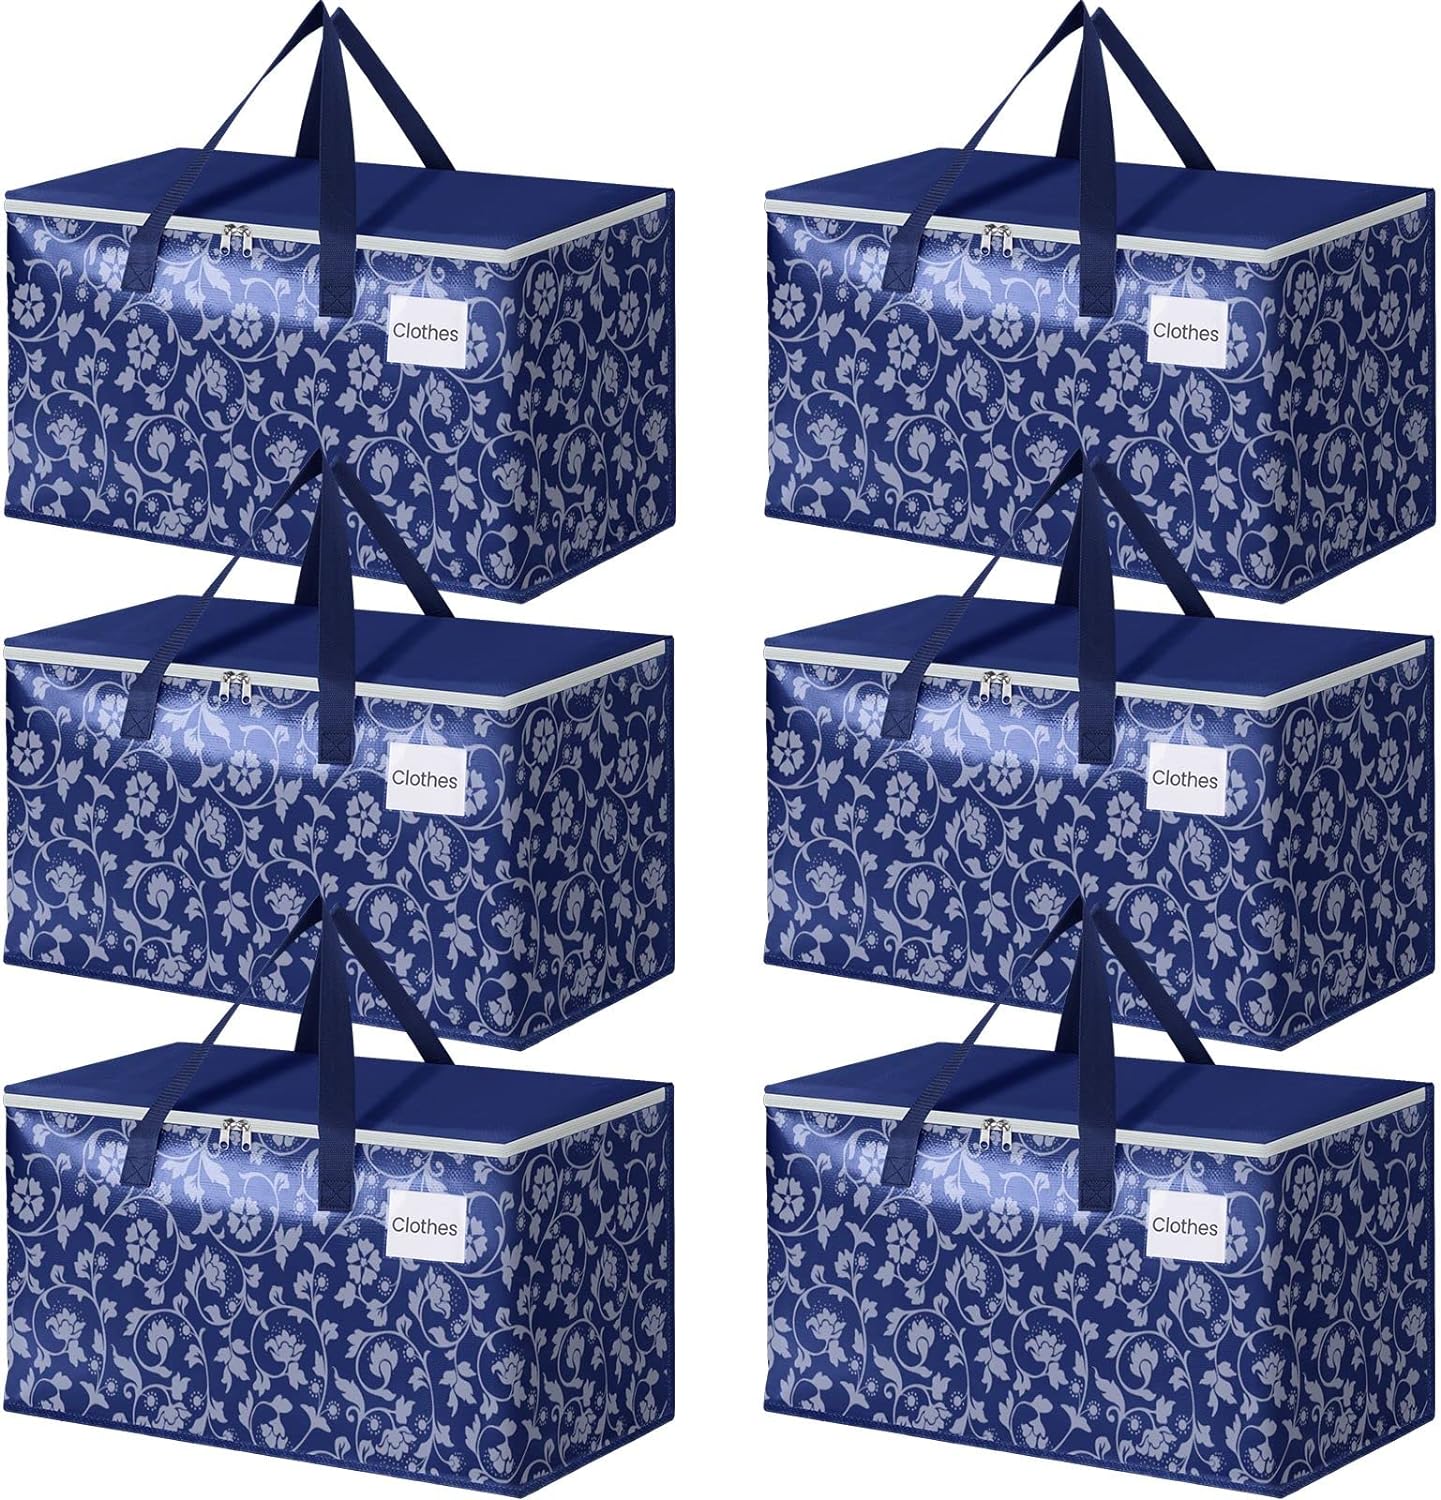 Storage bags are versatile containers designed for the temporary or long-term preservation and organization of various items. They come in a wide range of materials, sizes, and designs to cater to specific storage needs. Here' a general description of storage bags:Materials: Storage bags can be made from different materials, including plastic, fabric, paper, and more. The choice of material often depends on the intended use. Plastic bags are commonly used for food storage, while fabric and canv